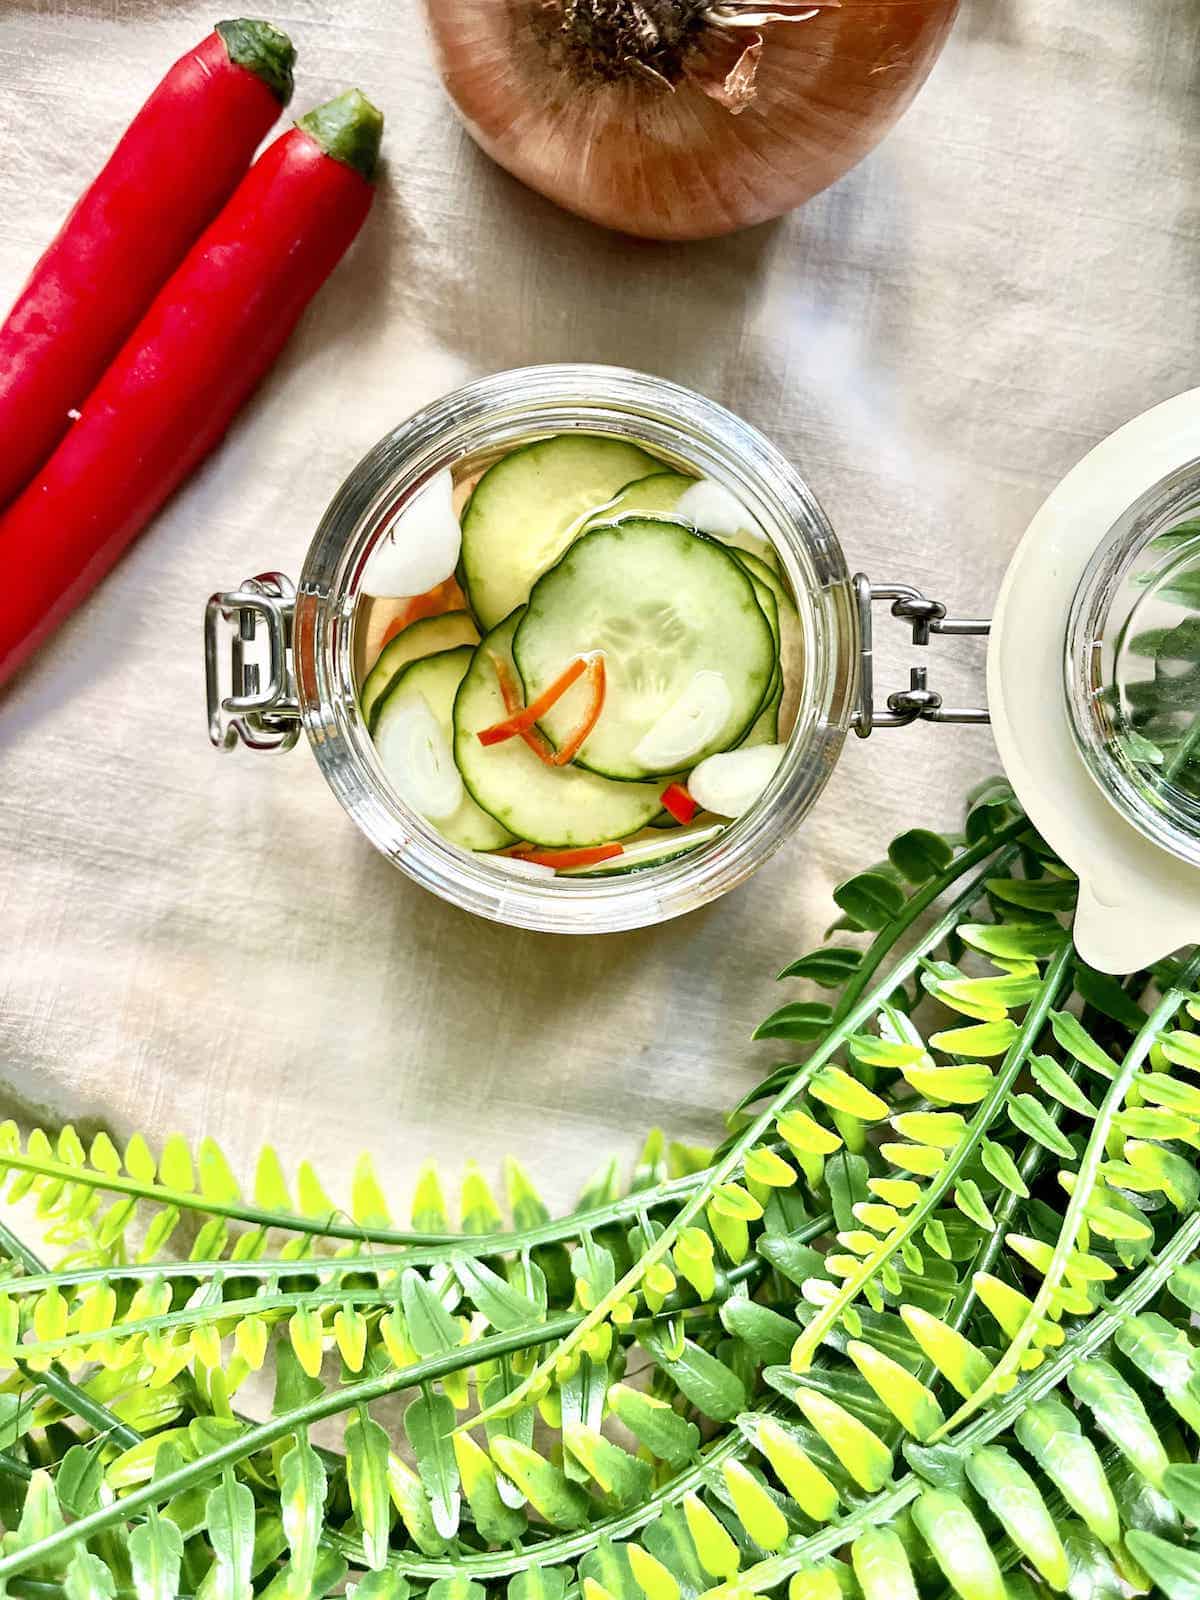 Sliced cucumbers and red chilies in a glass jar.